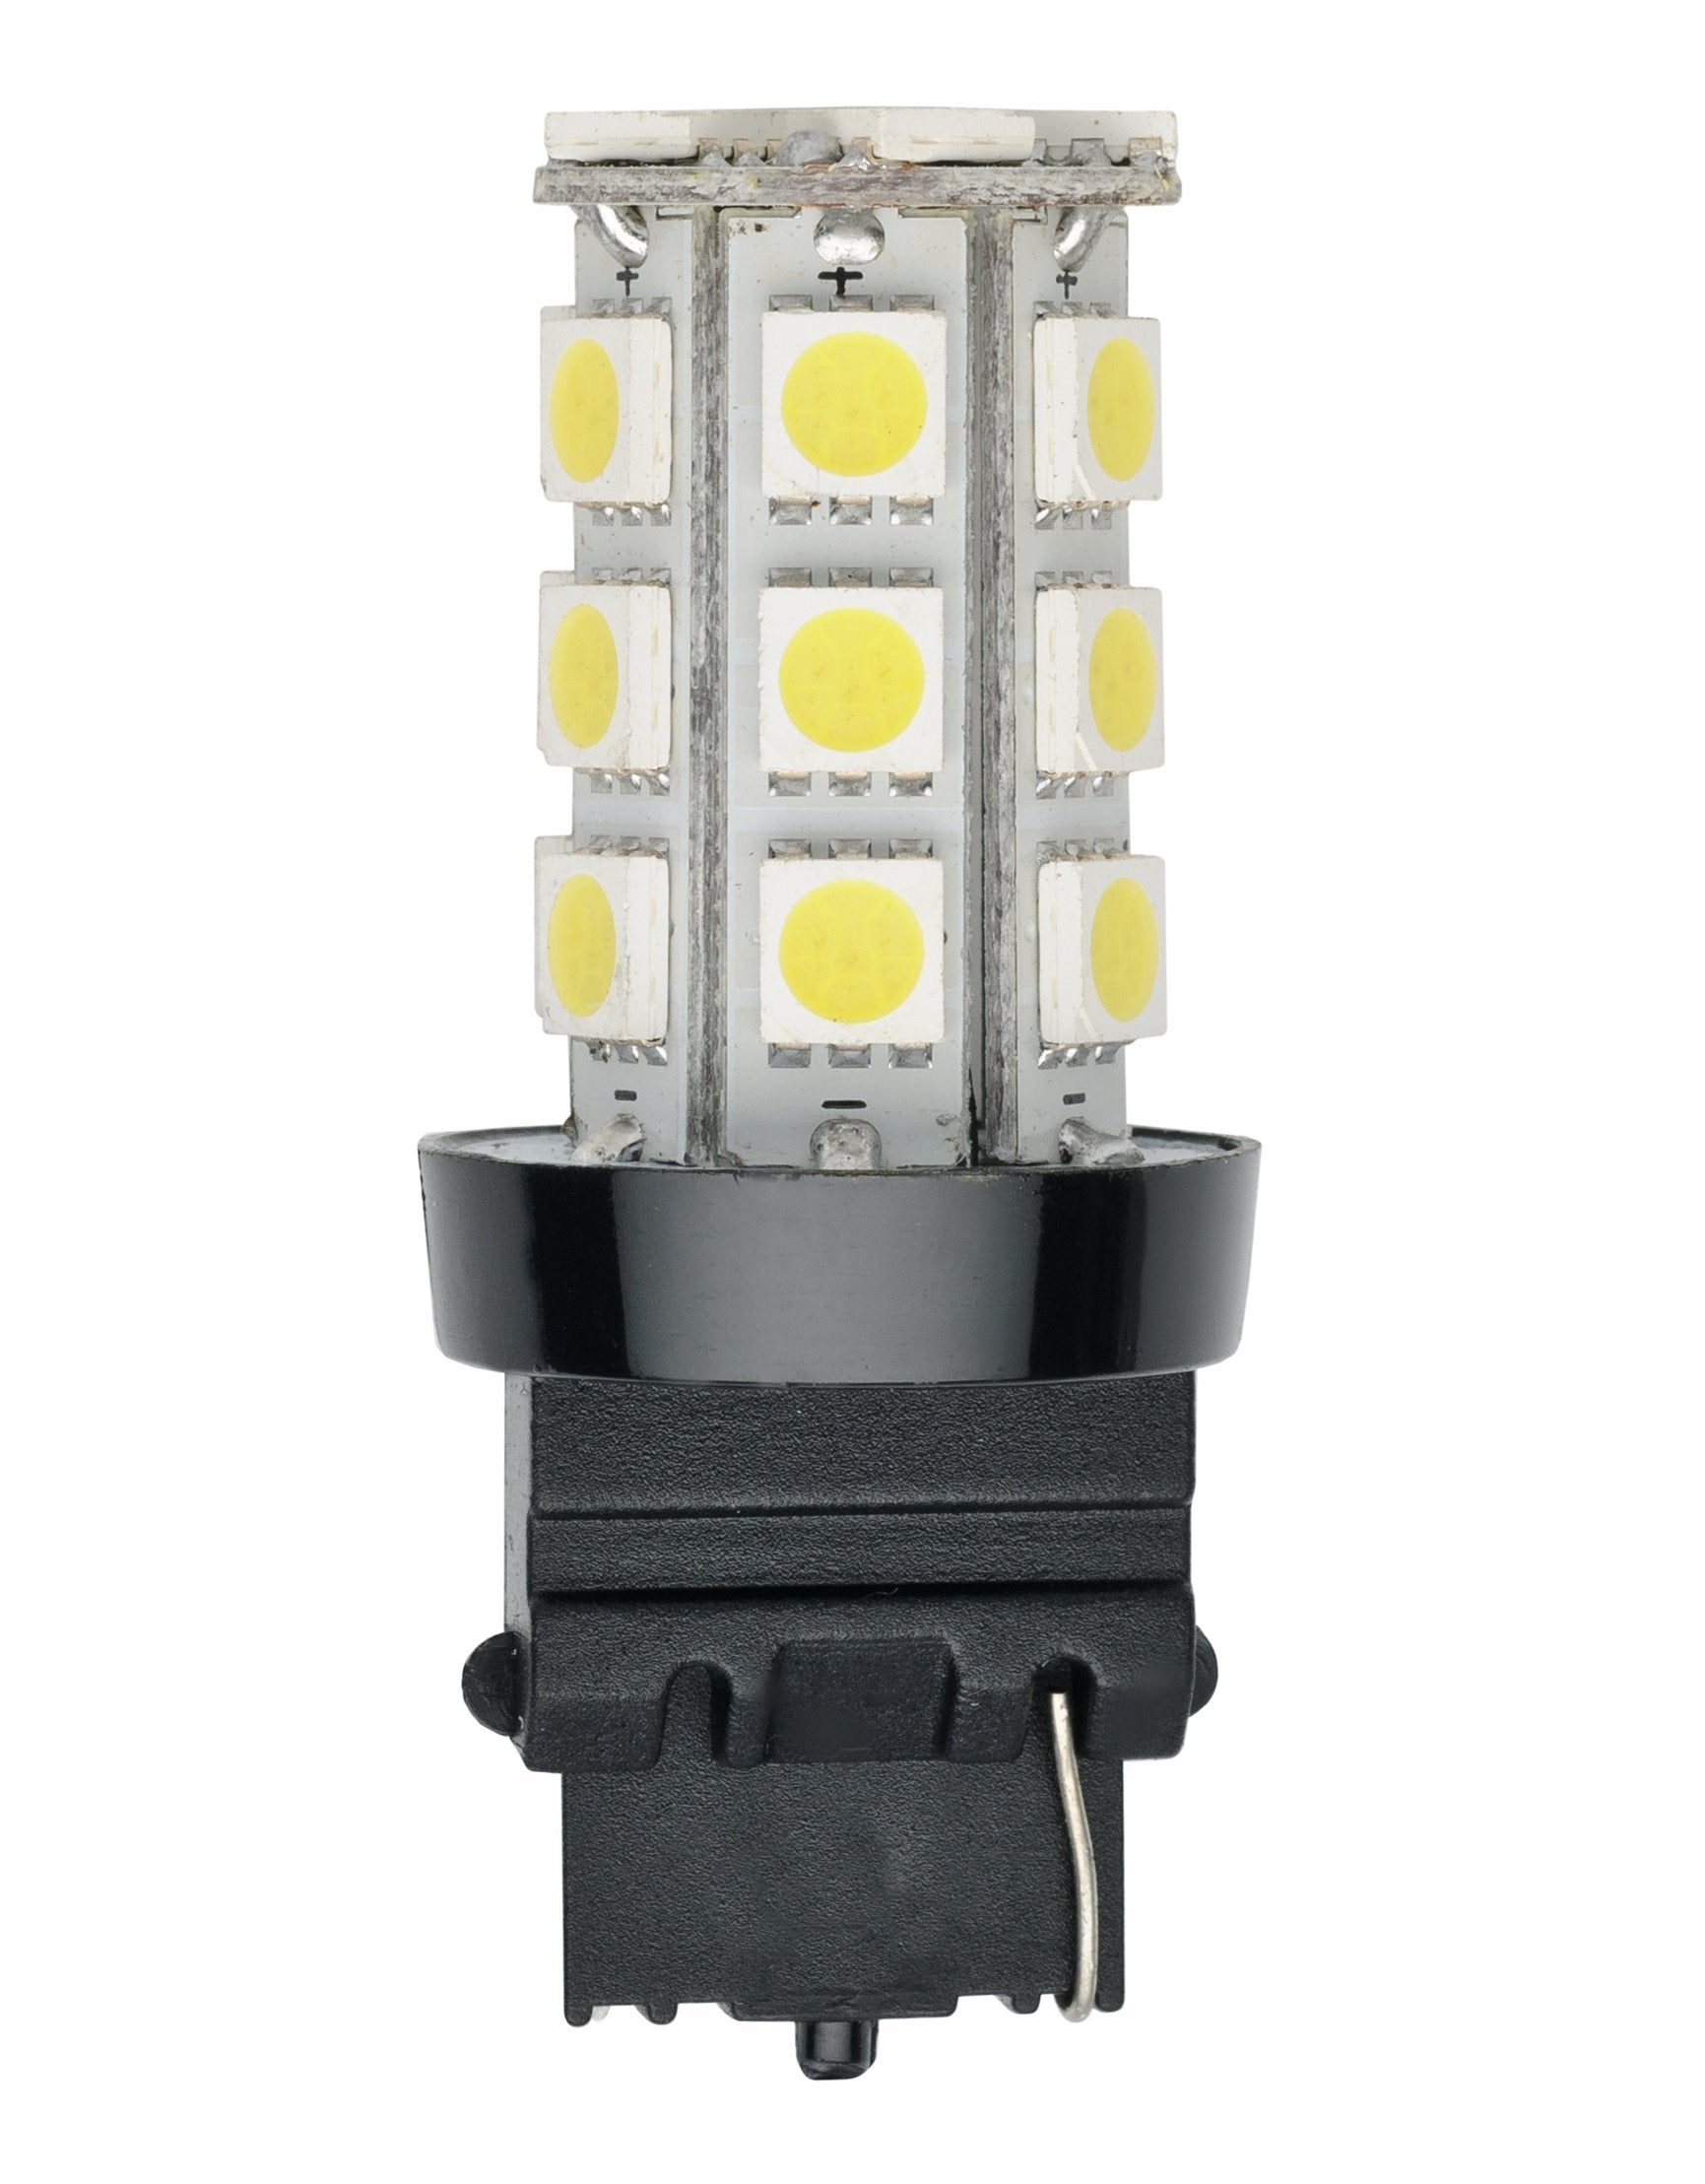 AP Products 016-3156-280 Star Lights 12V Exterior Replacement Bulb - Single